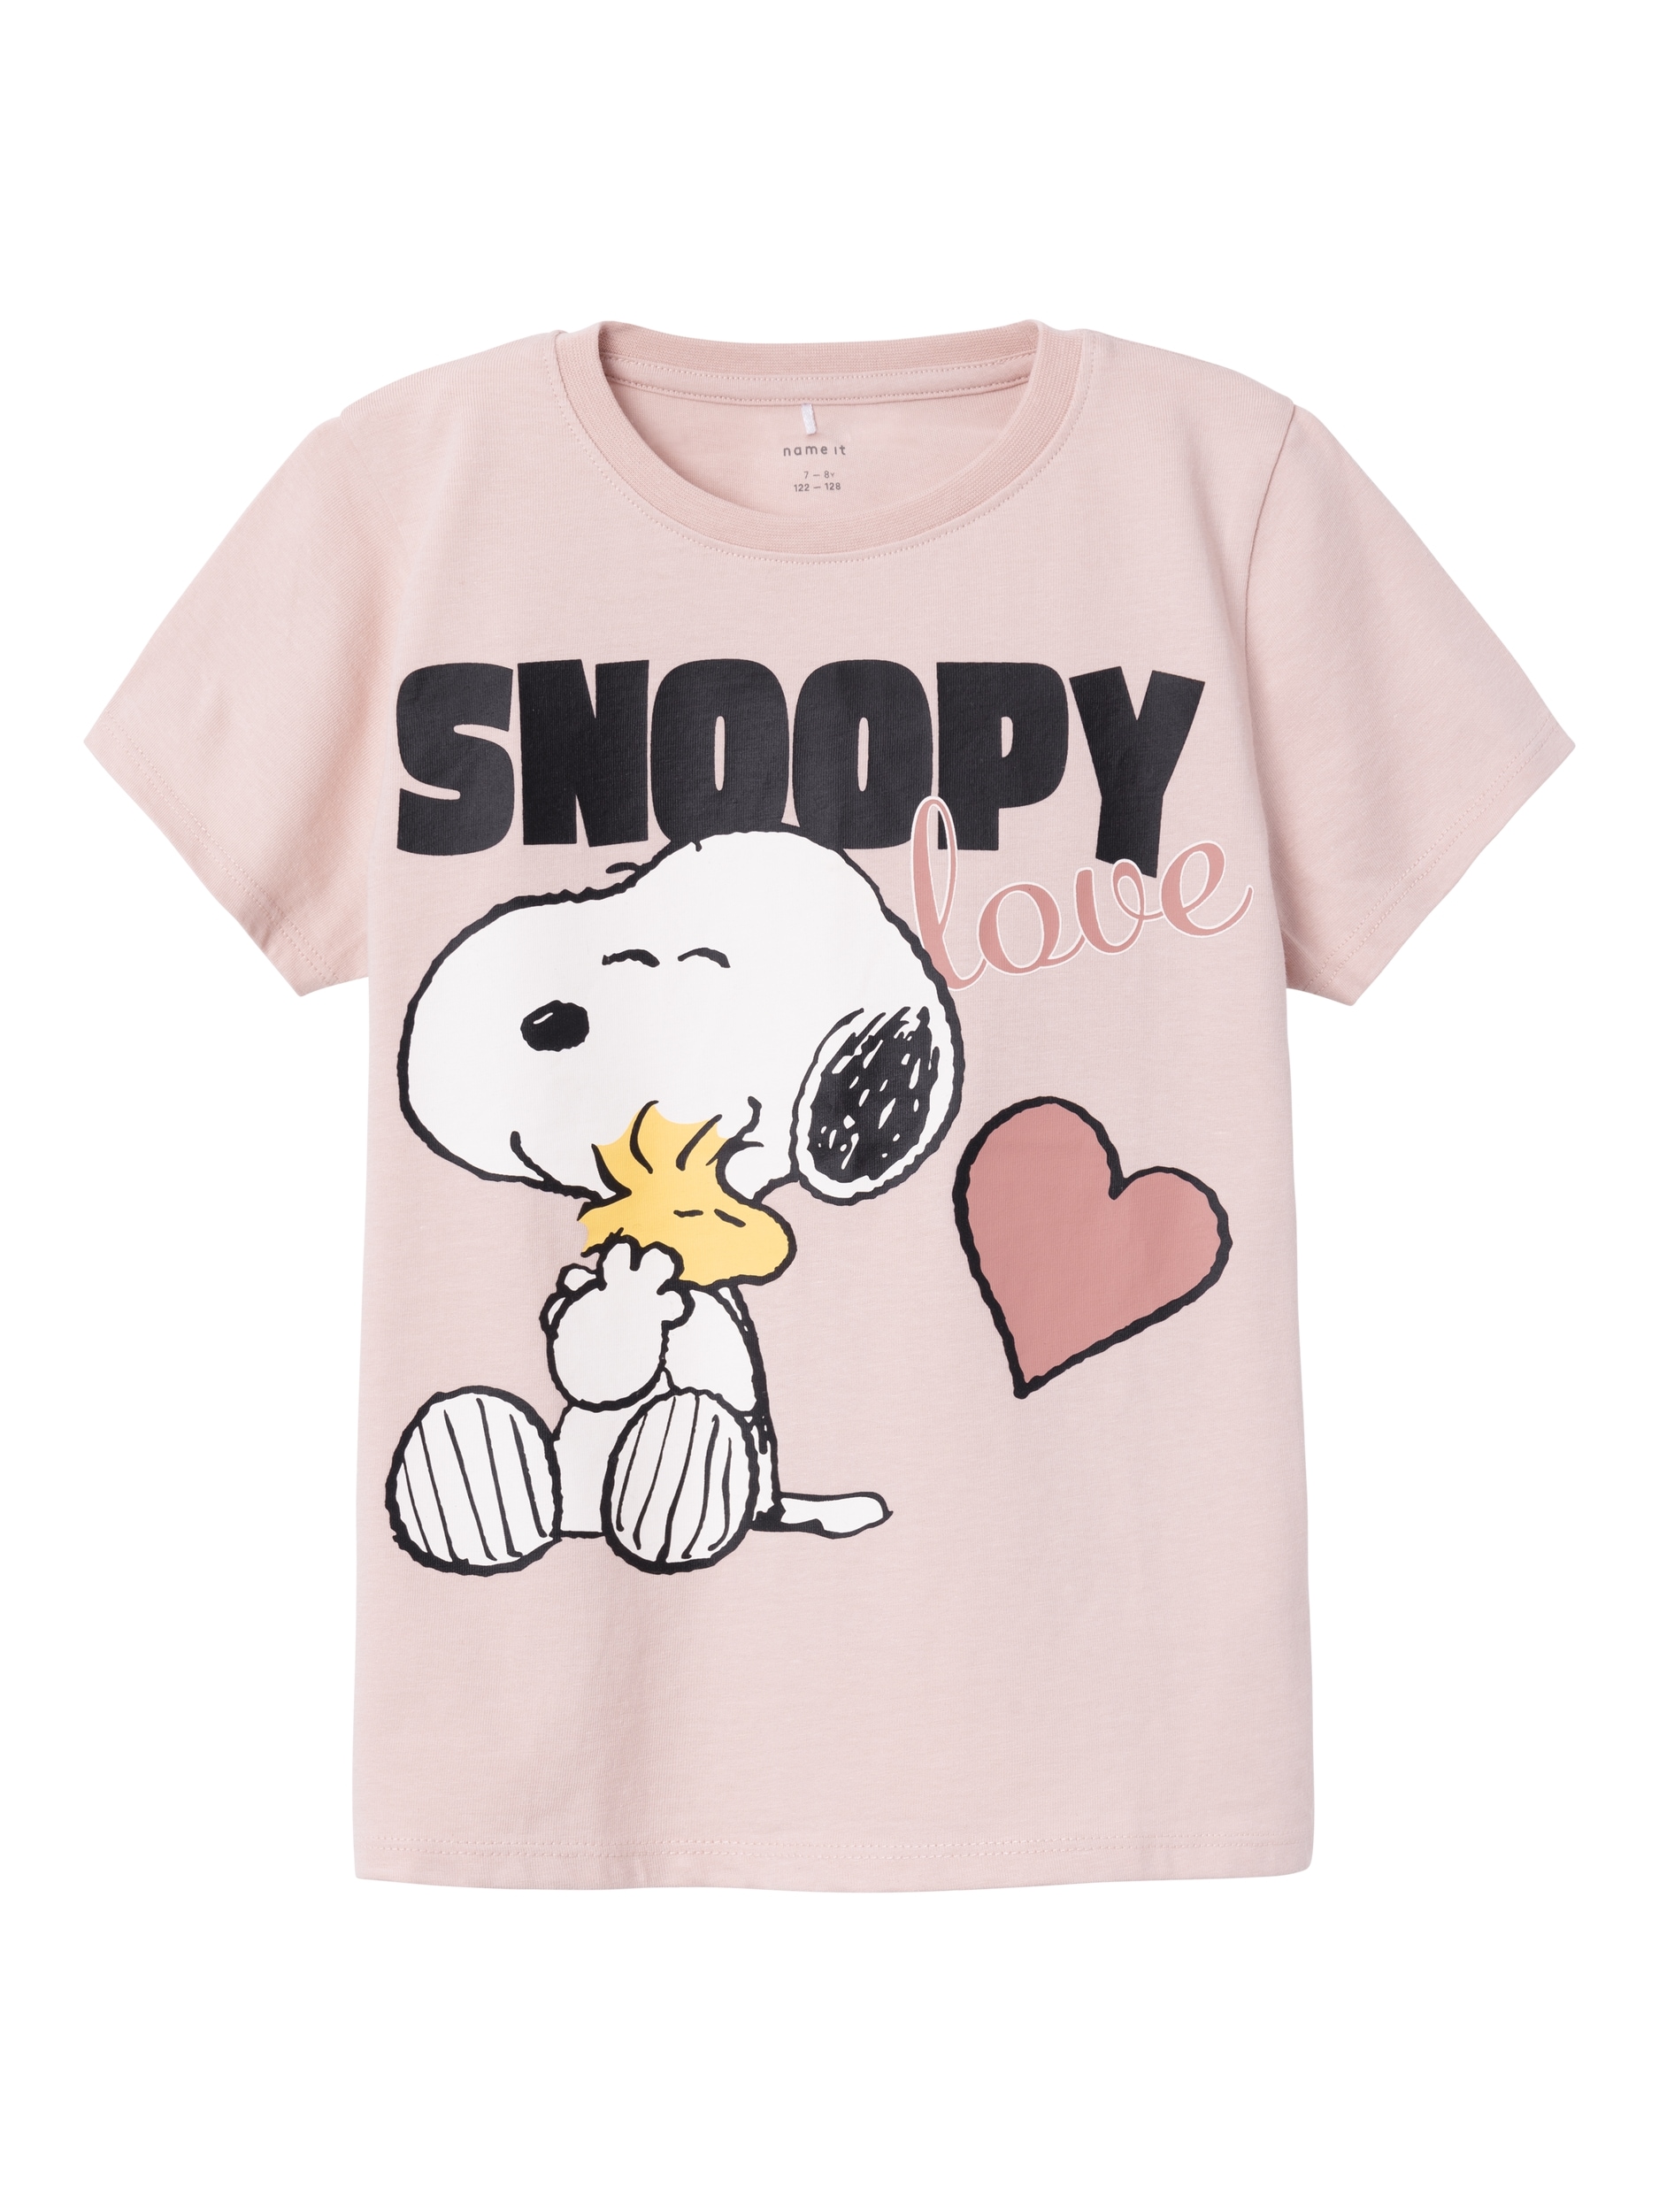 Name It T-Shirt TOP bei online »NKFNANNI NOOS SS VDE« SNOOPY